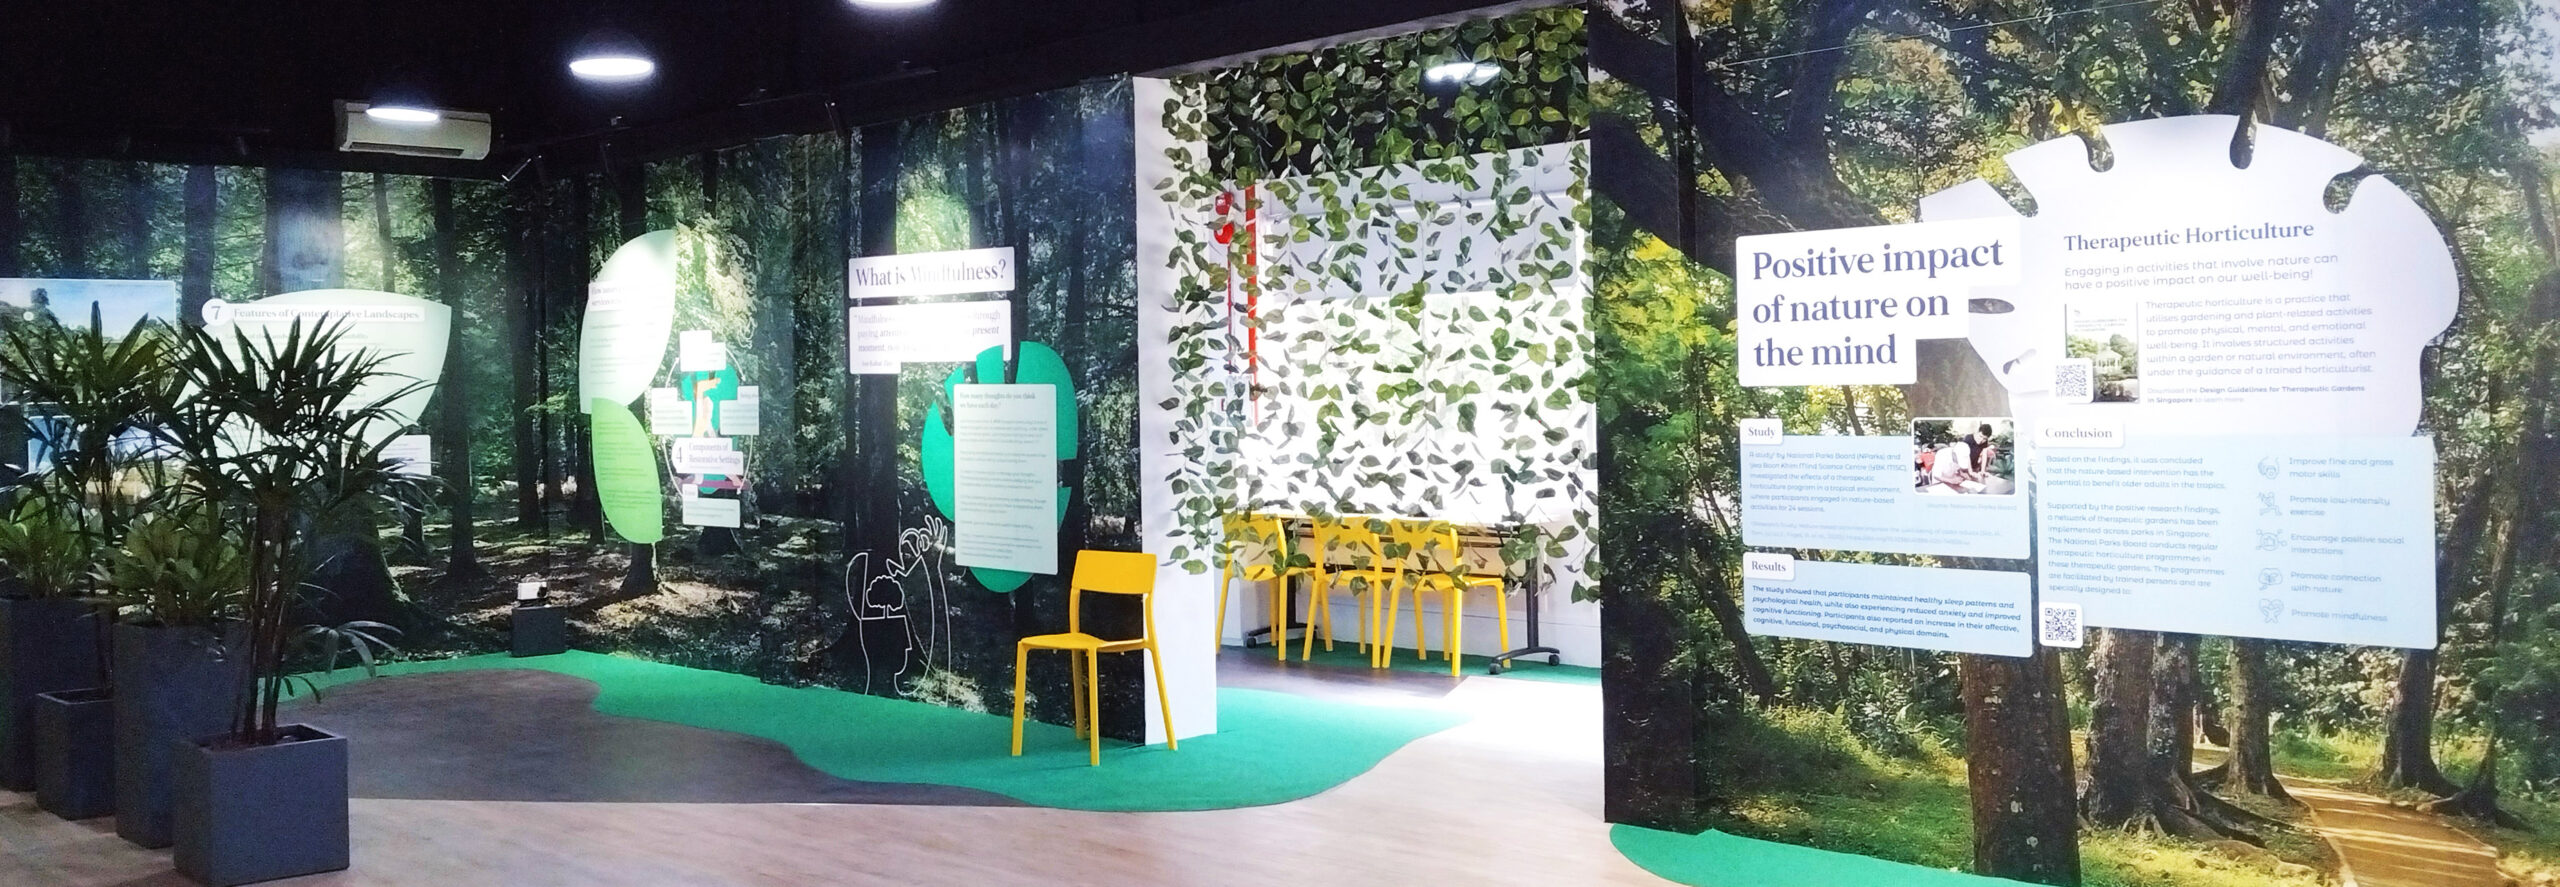 Visiting Nature’s Embrace: A Singapore Exhibition Showcasing the Healing Effects of Nature